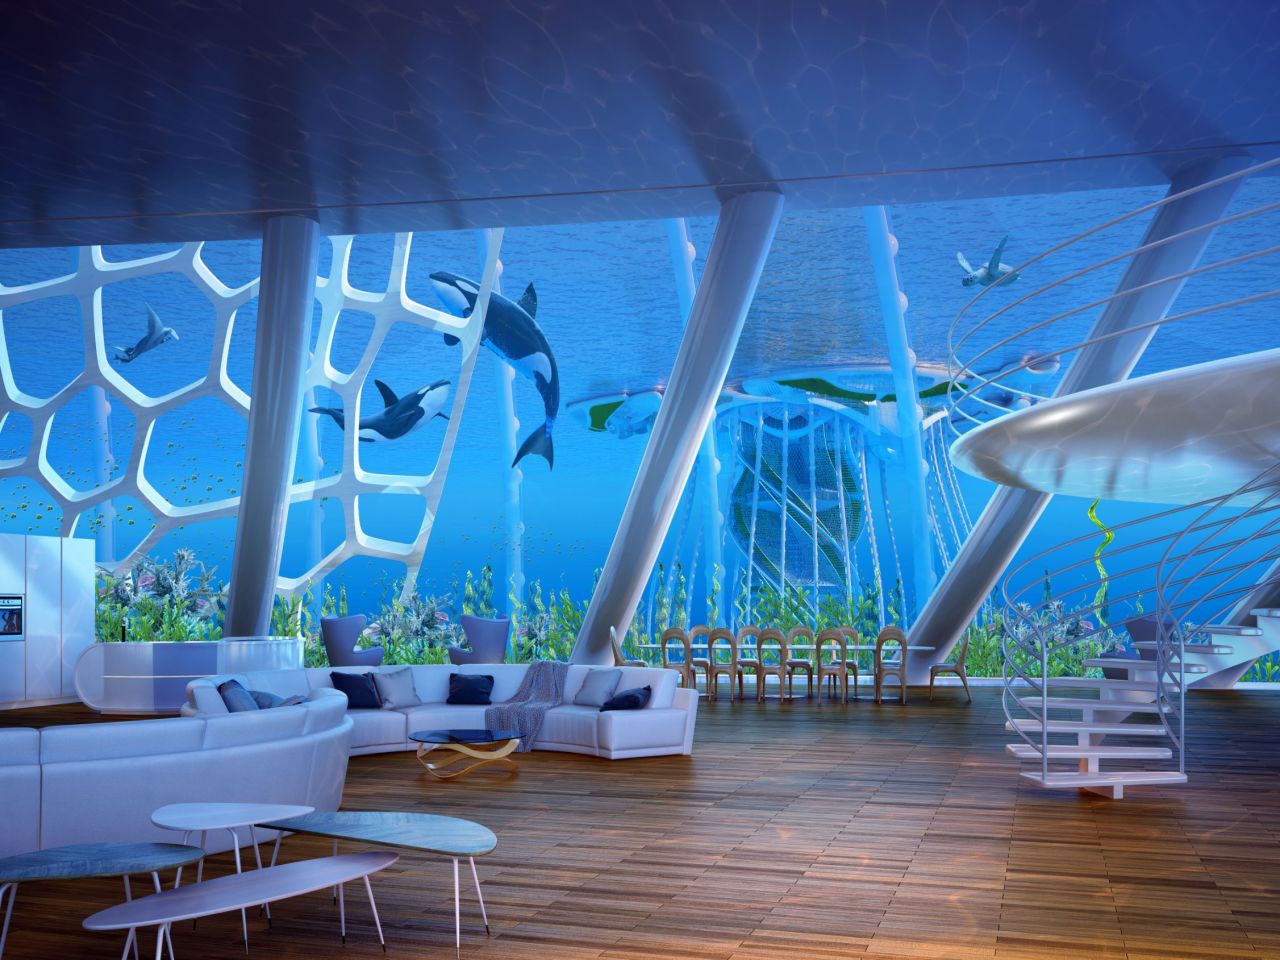 As well as living space, the Aequorea would house science labs, office space, hotels, sports fields, and farms across 250 floors and reach a depth of up to 1000 meters.